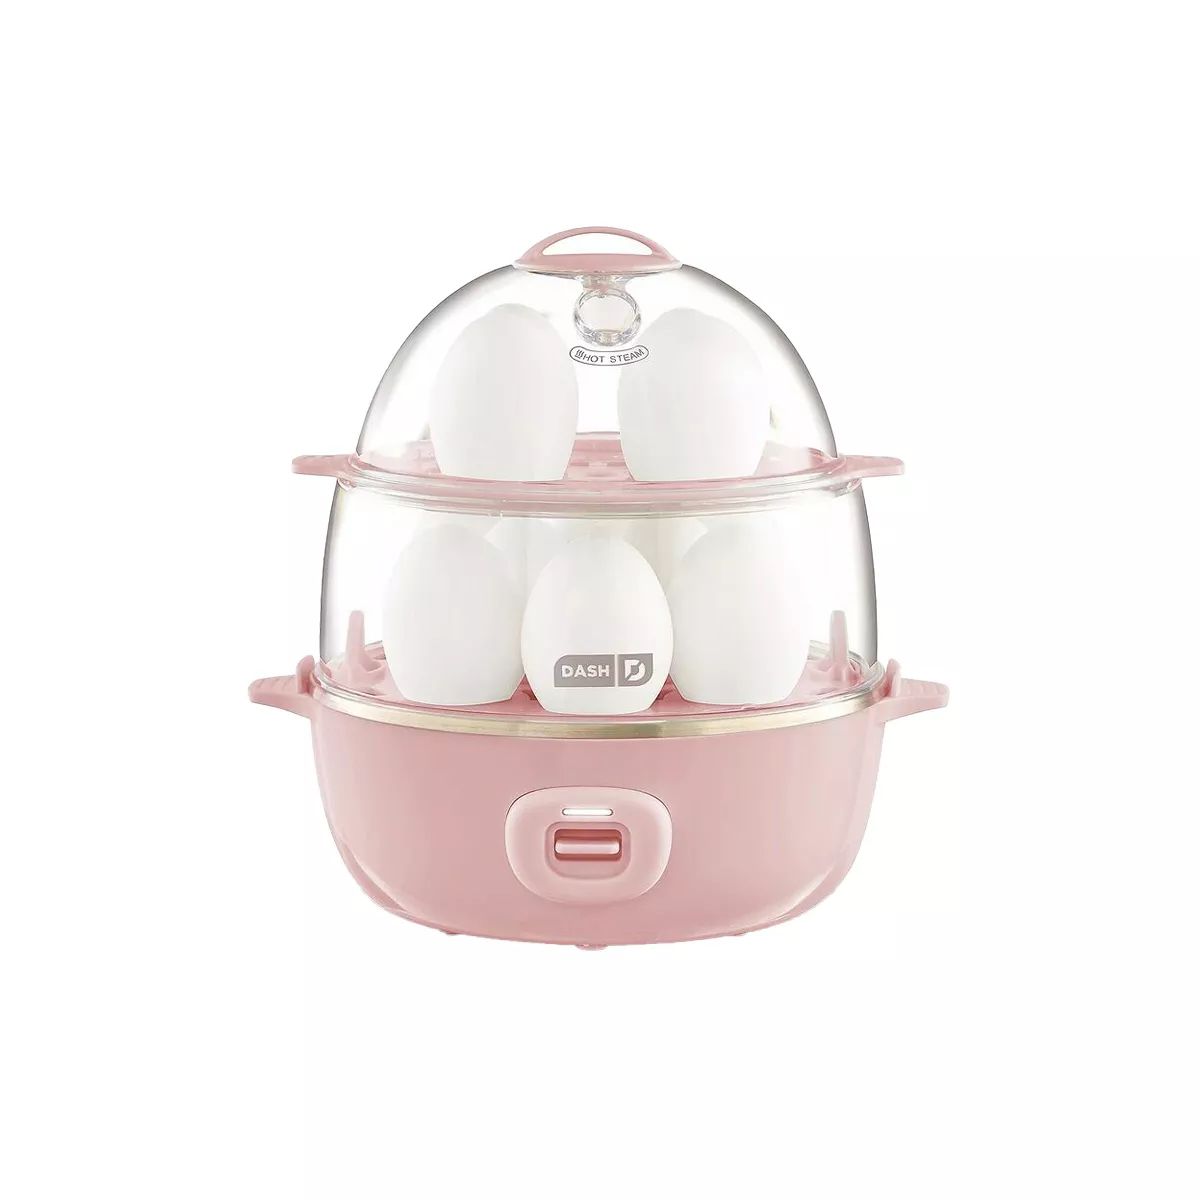 Dash Rapid Egg Cooker with Auto Shut Off Feature for Hard Boiled, Poached and Scrambled Eggs, 12 ... | Target